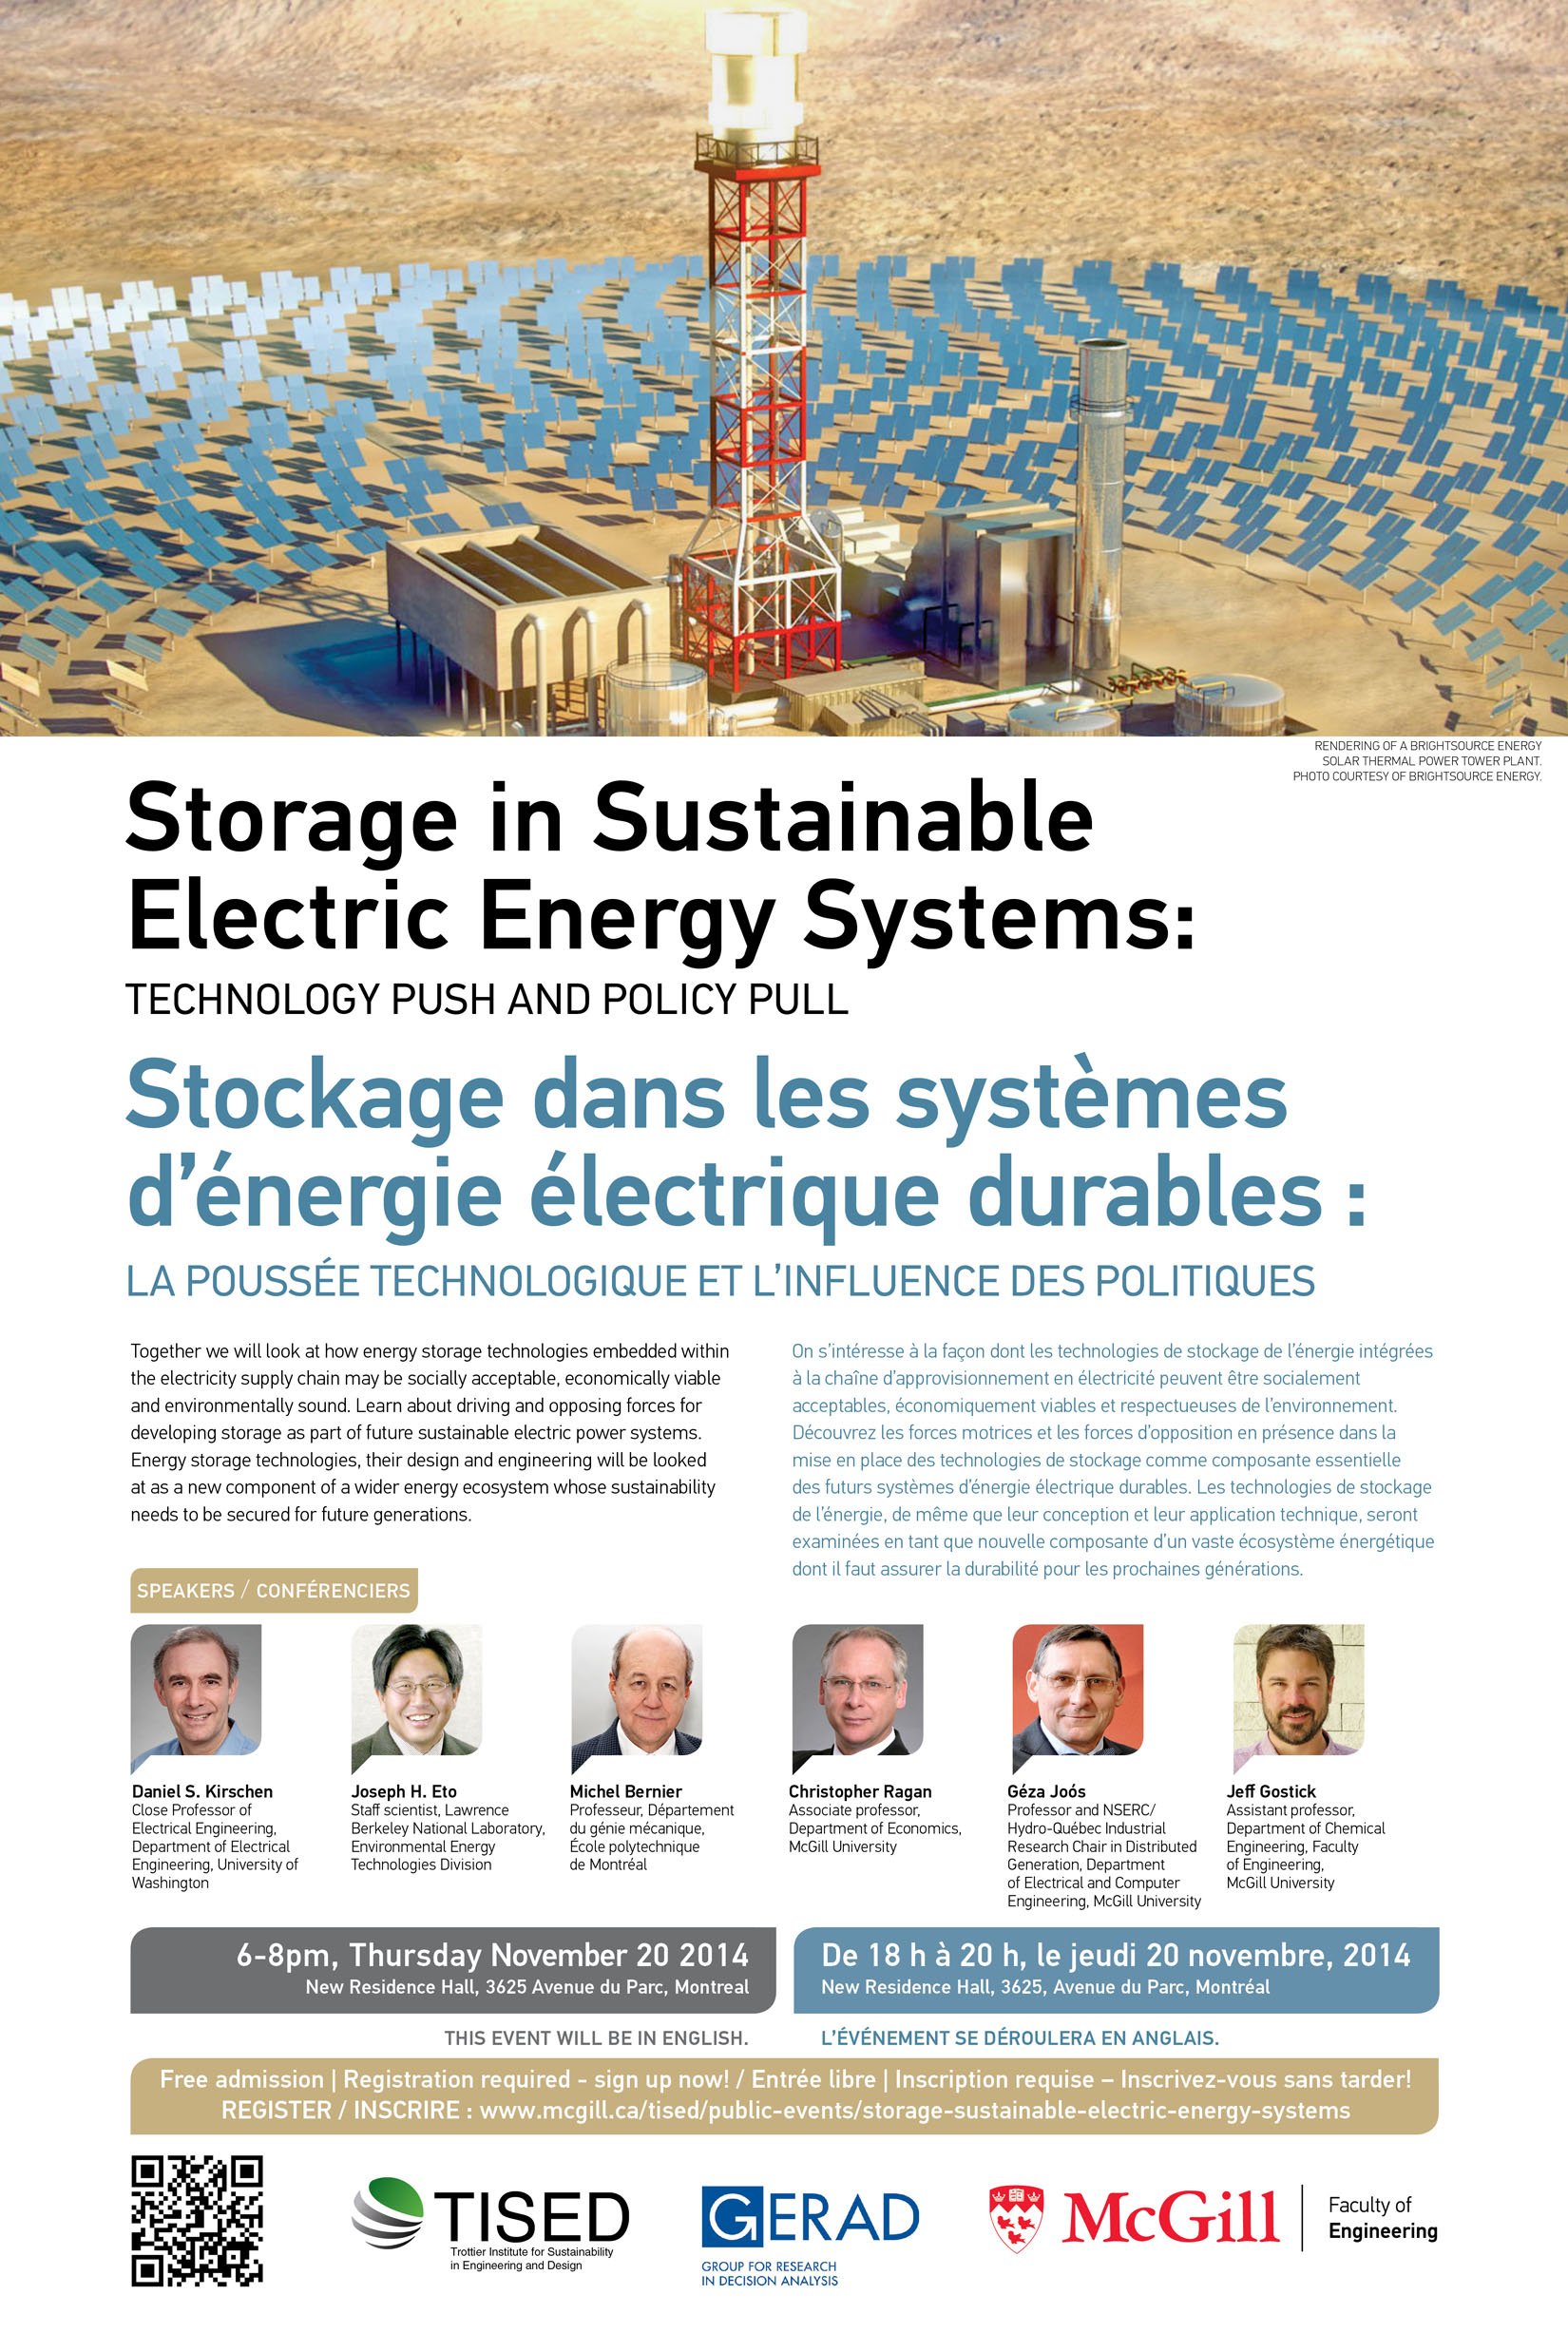 Storage in Sustainable Electric Energy Systems: Technology Push and Policy Pull